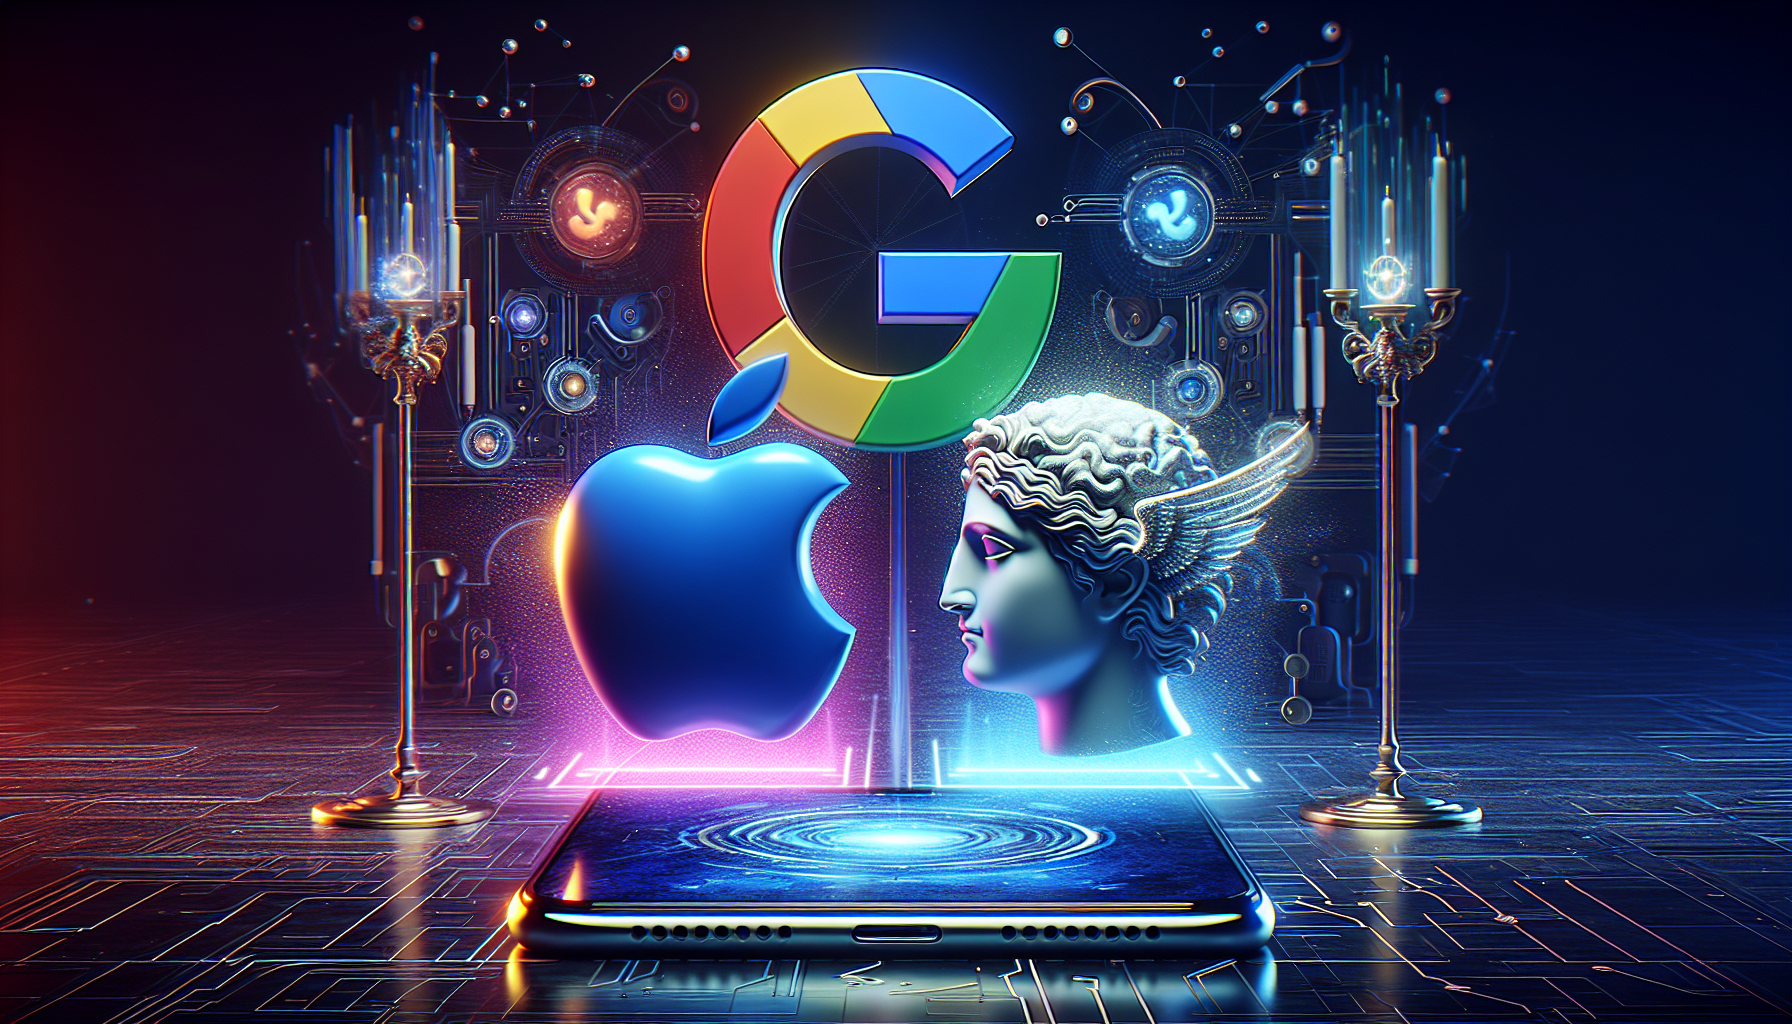 Report: Apple might partner with Google to enhance new iPhone AI features using Gemini technology.